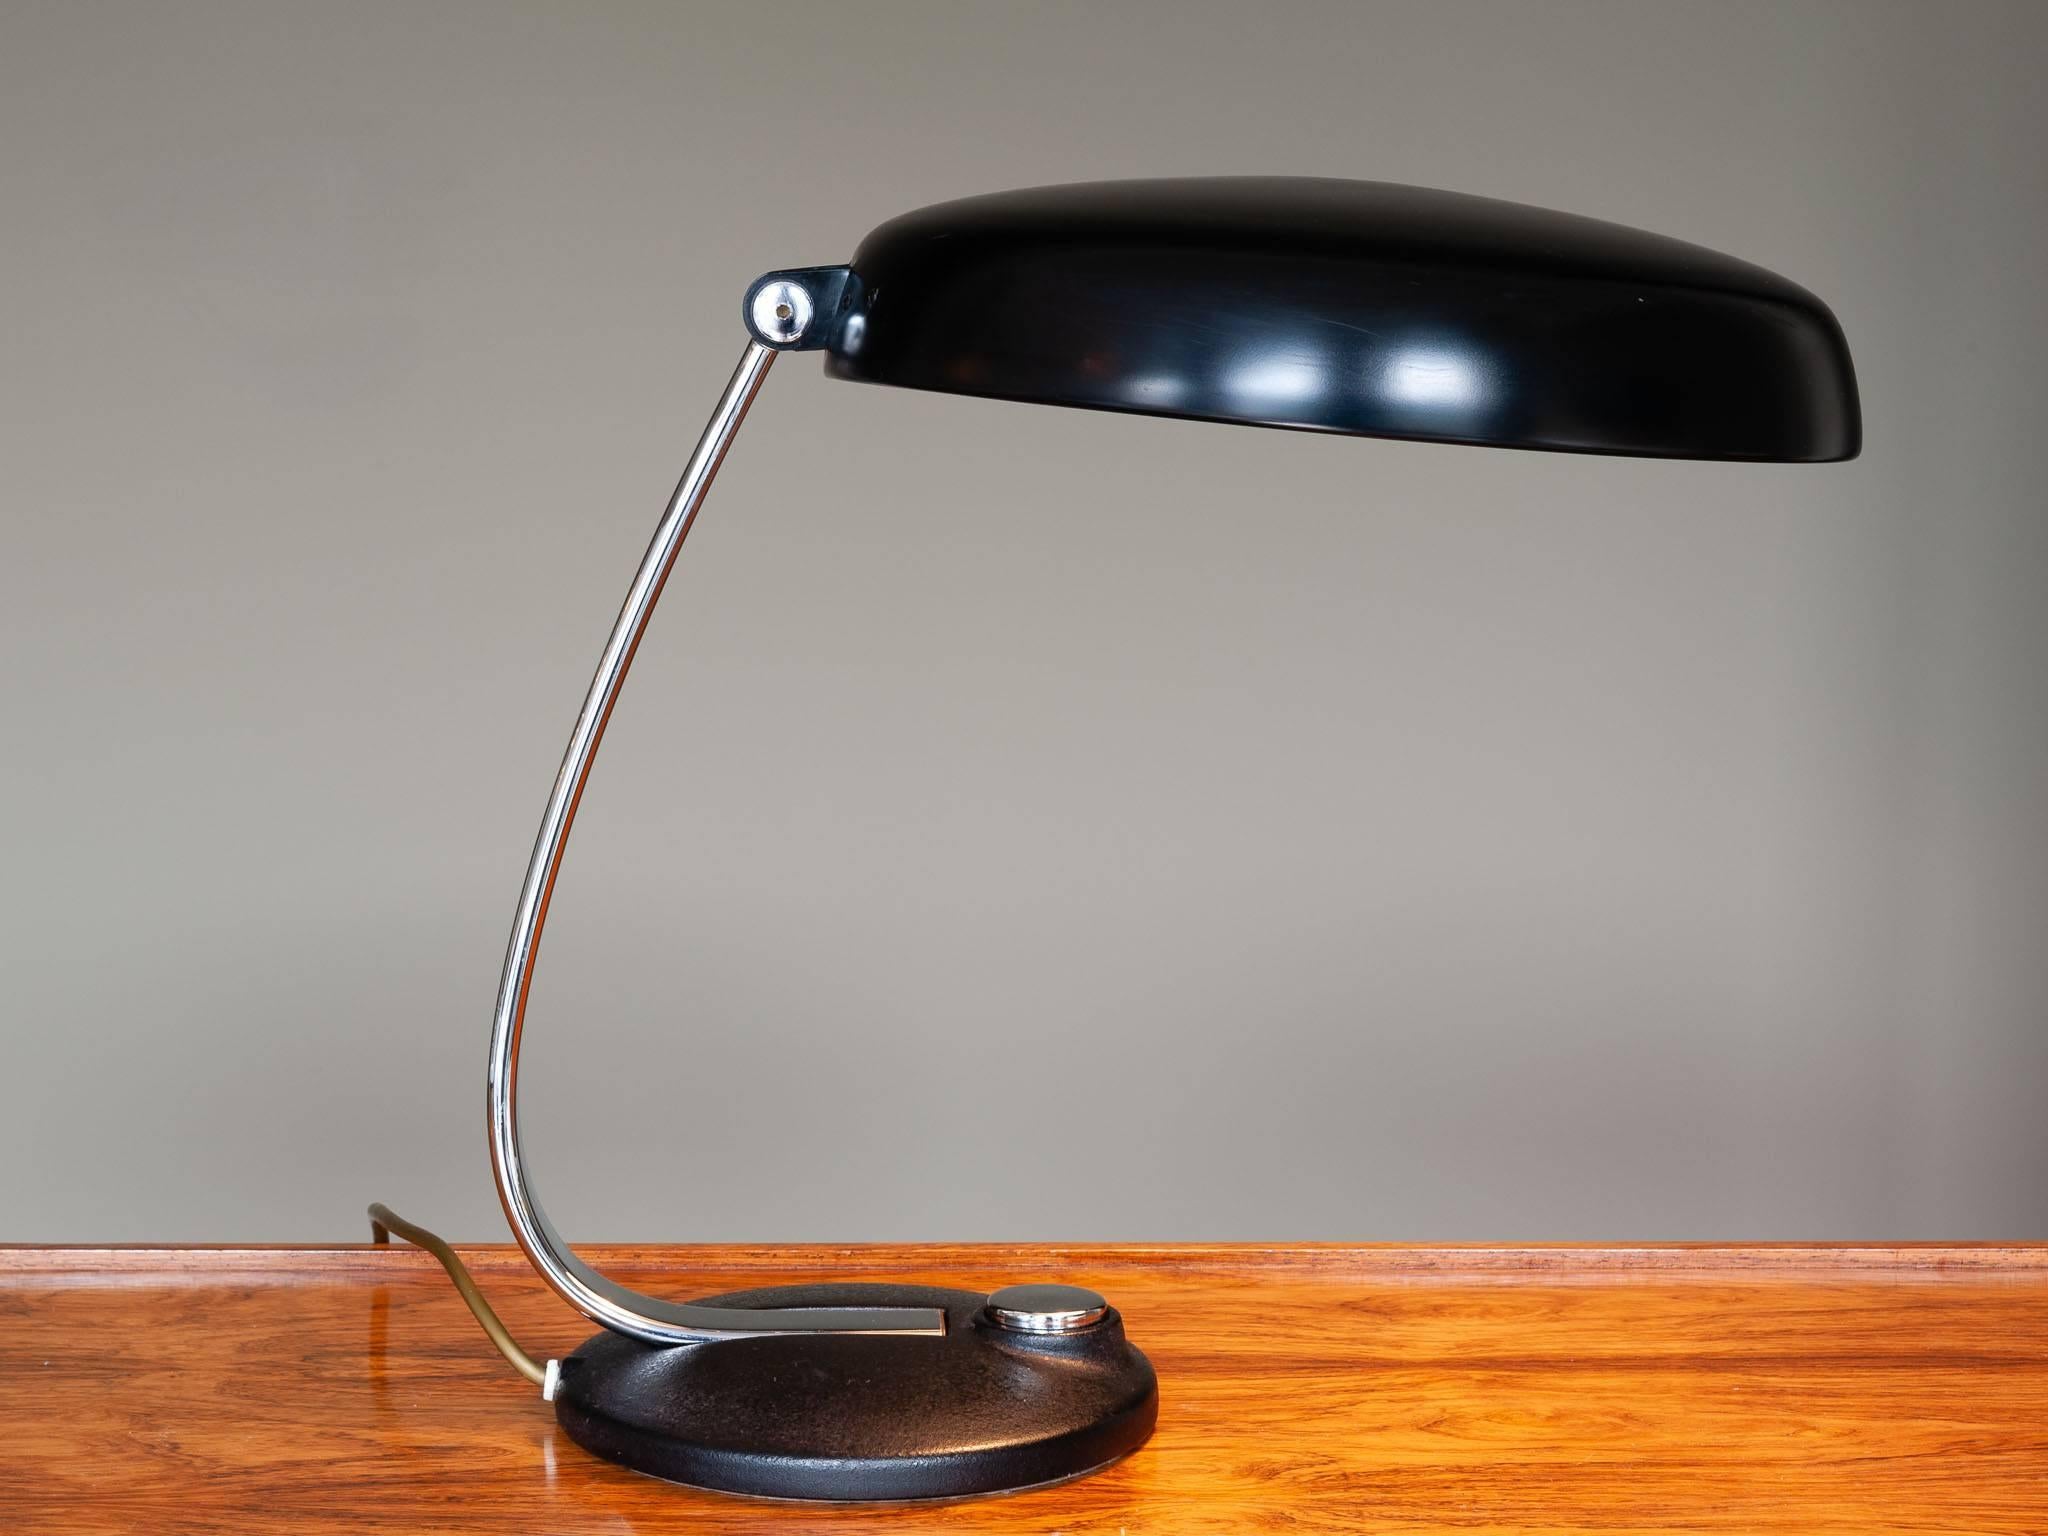 1960s German Kaiser style desk lamp with a polished black canopy shade with white interior which contrasts with the black matte enameled base. The polished chrome adjustable stem and large on/off button contrast perfectly against the rest of the